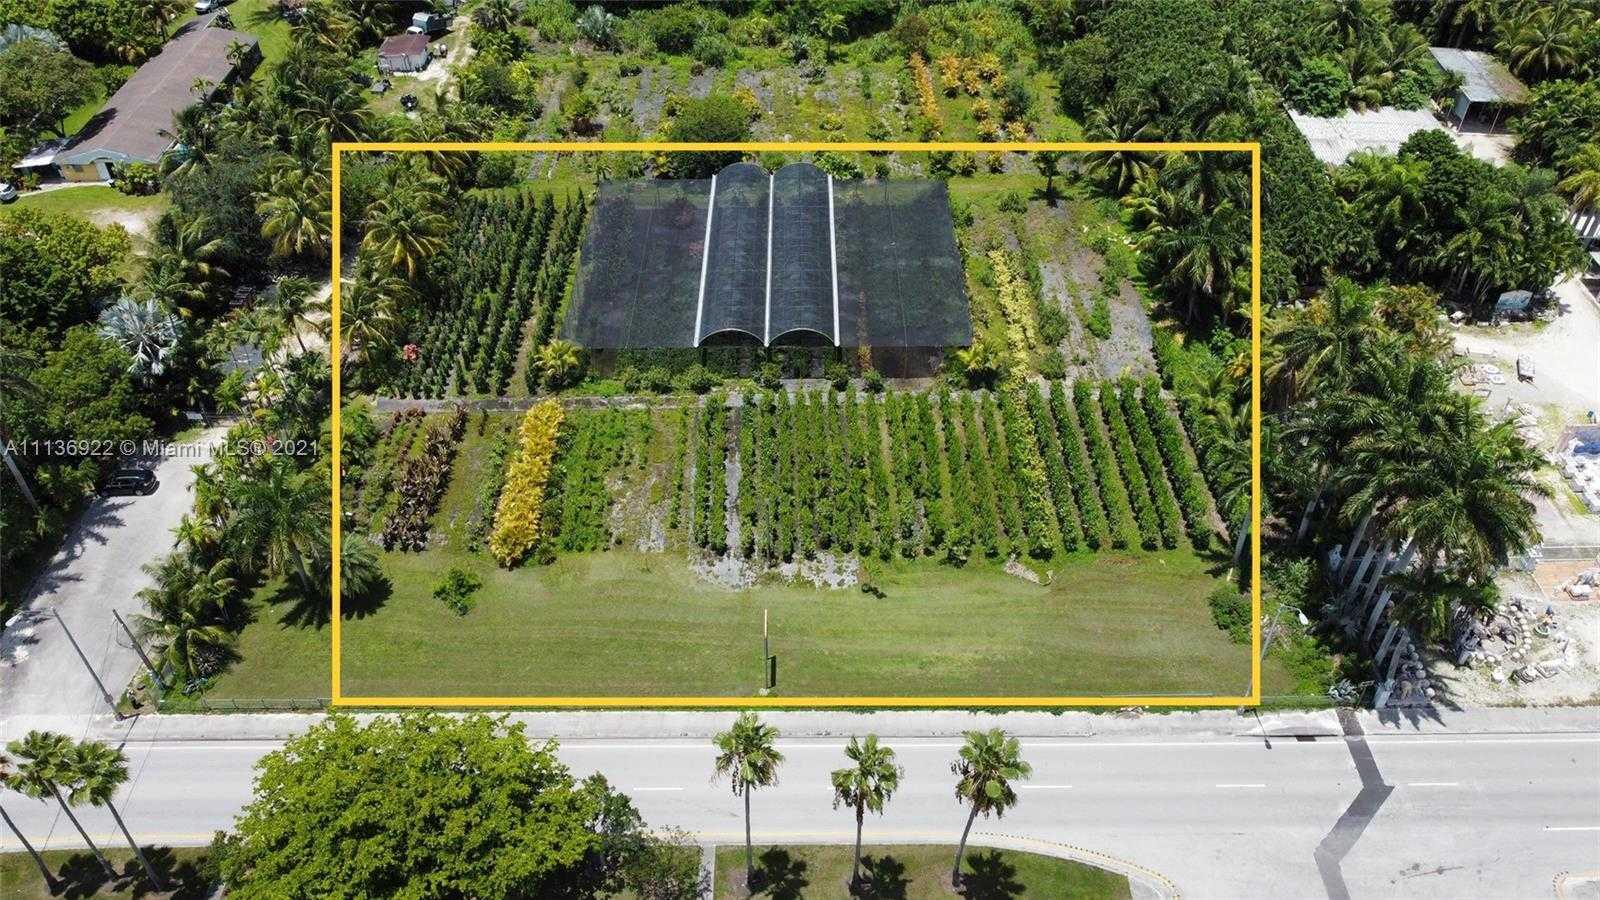 12595 56 ST, Miami, Commercial Land,  for sale, Test Realtyworld broker